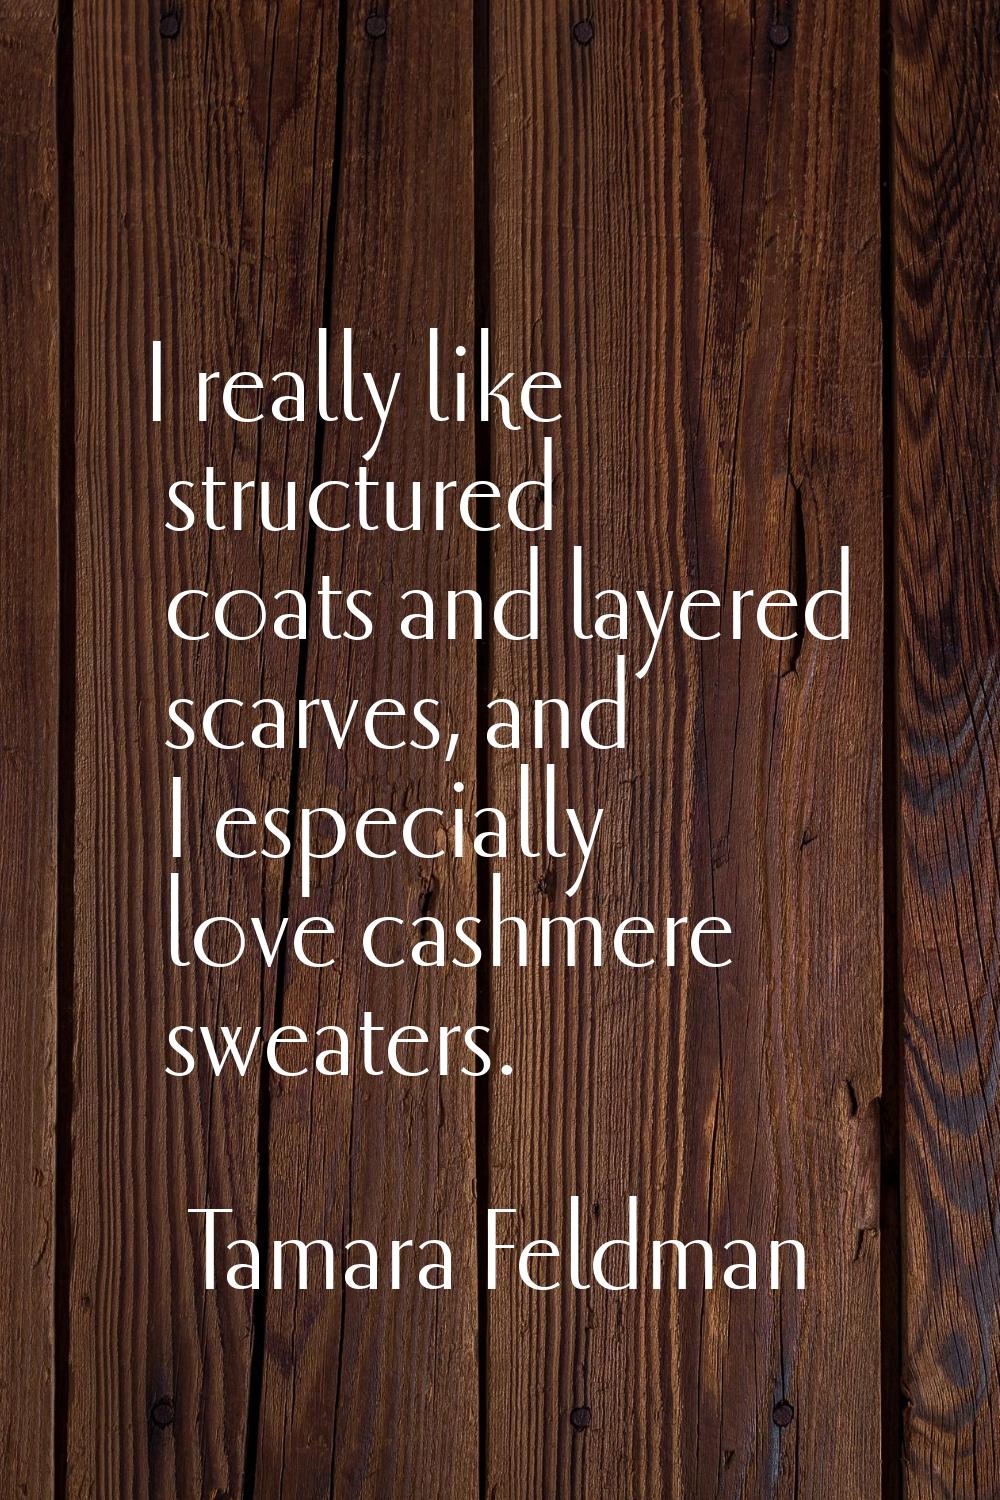 I really like structured coats and layered scarves, and I especially love cashmere sweaters.